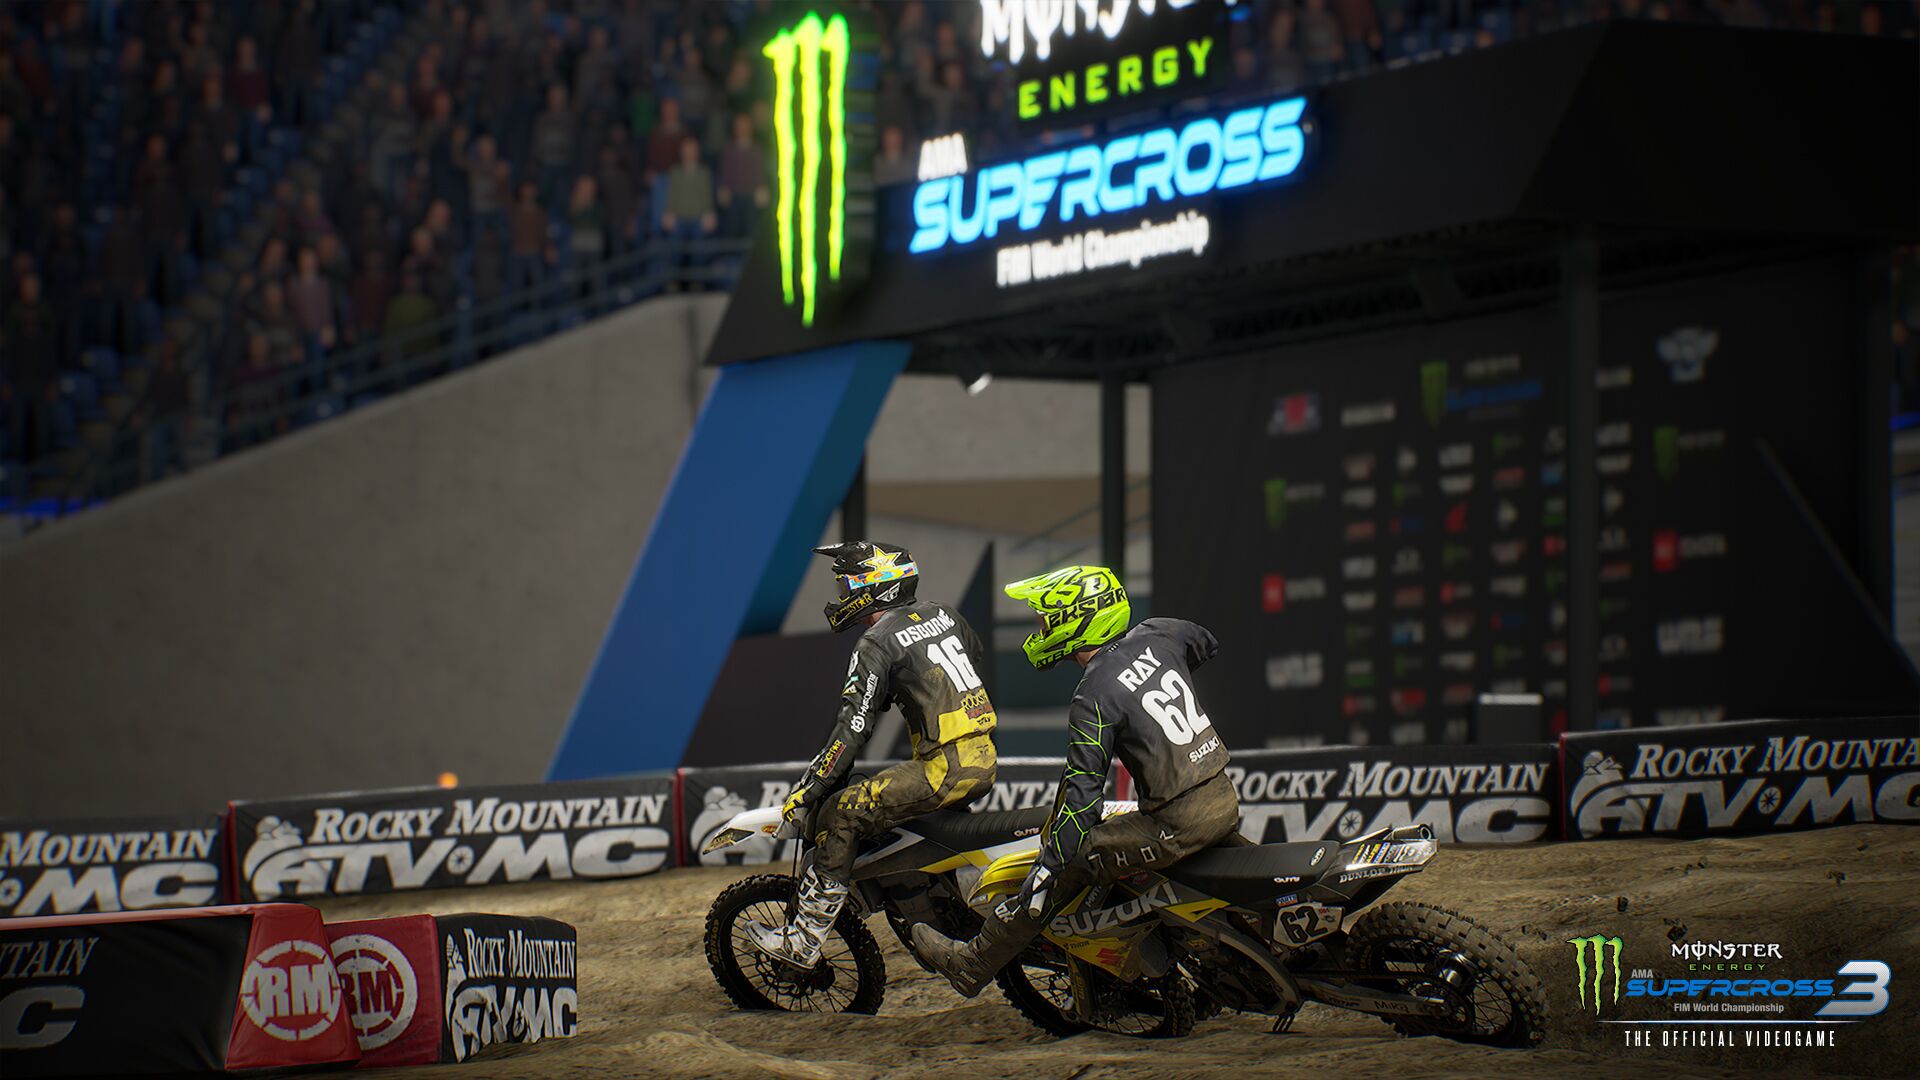 Annunciato Monster Energy Supercross – The Official Videogame 3 per Switch